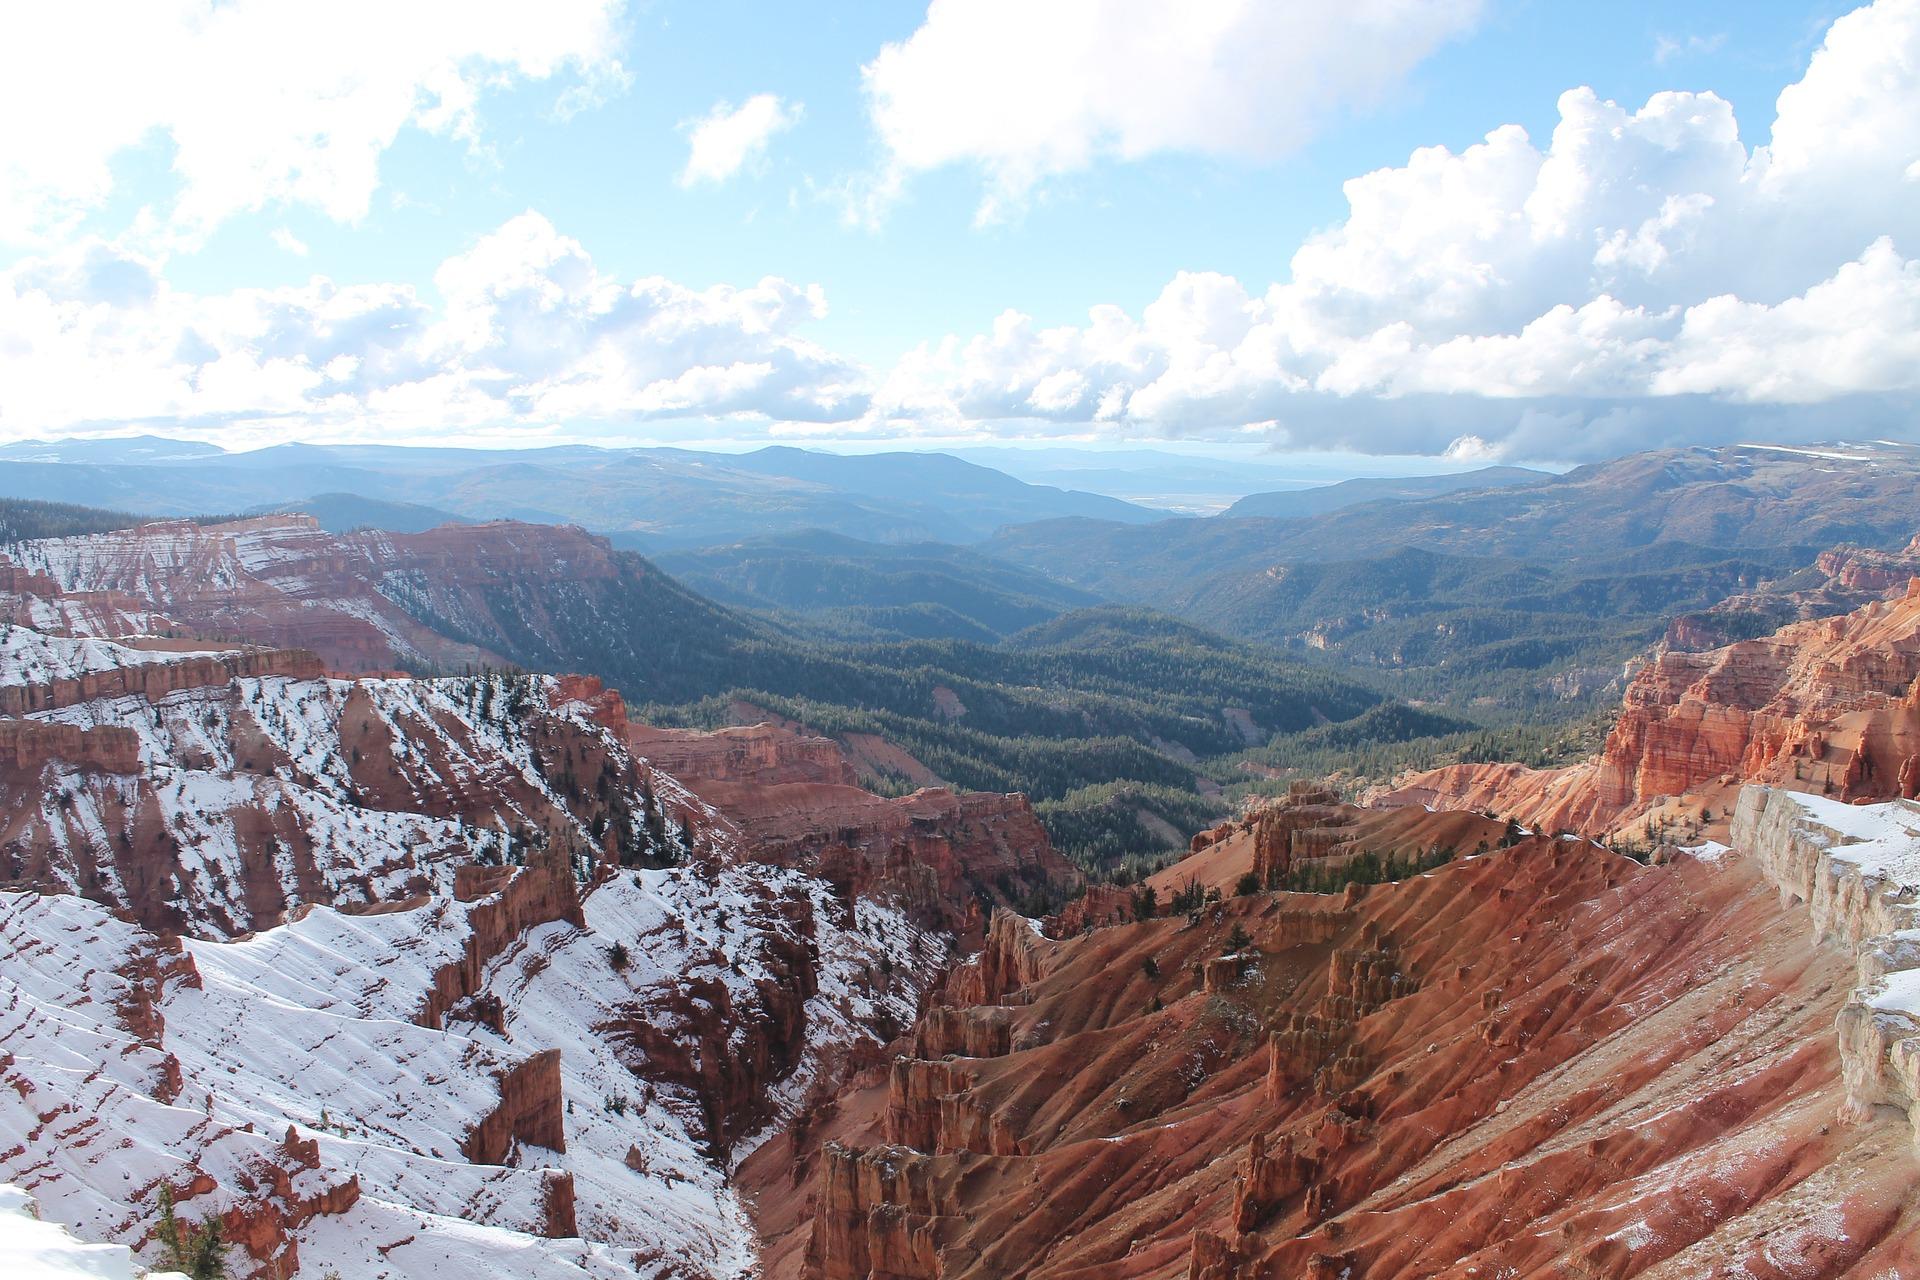 Cedar breaks in the winter. Snow on the peaks and green in the valley.